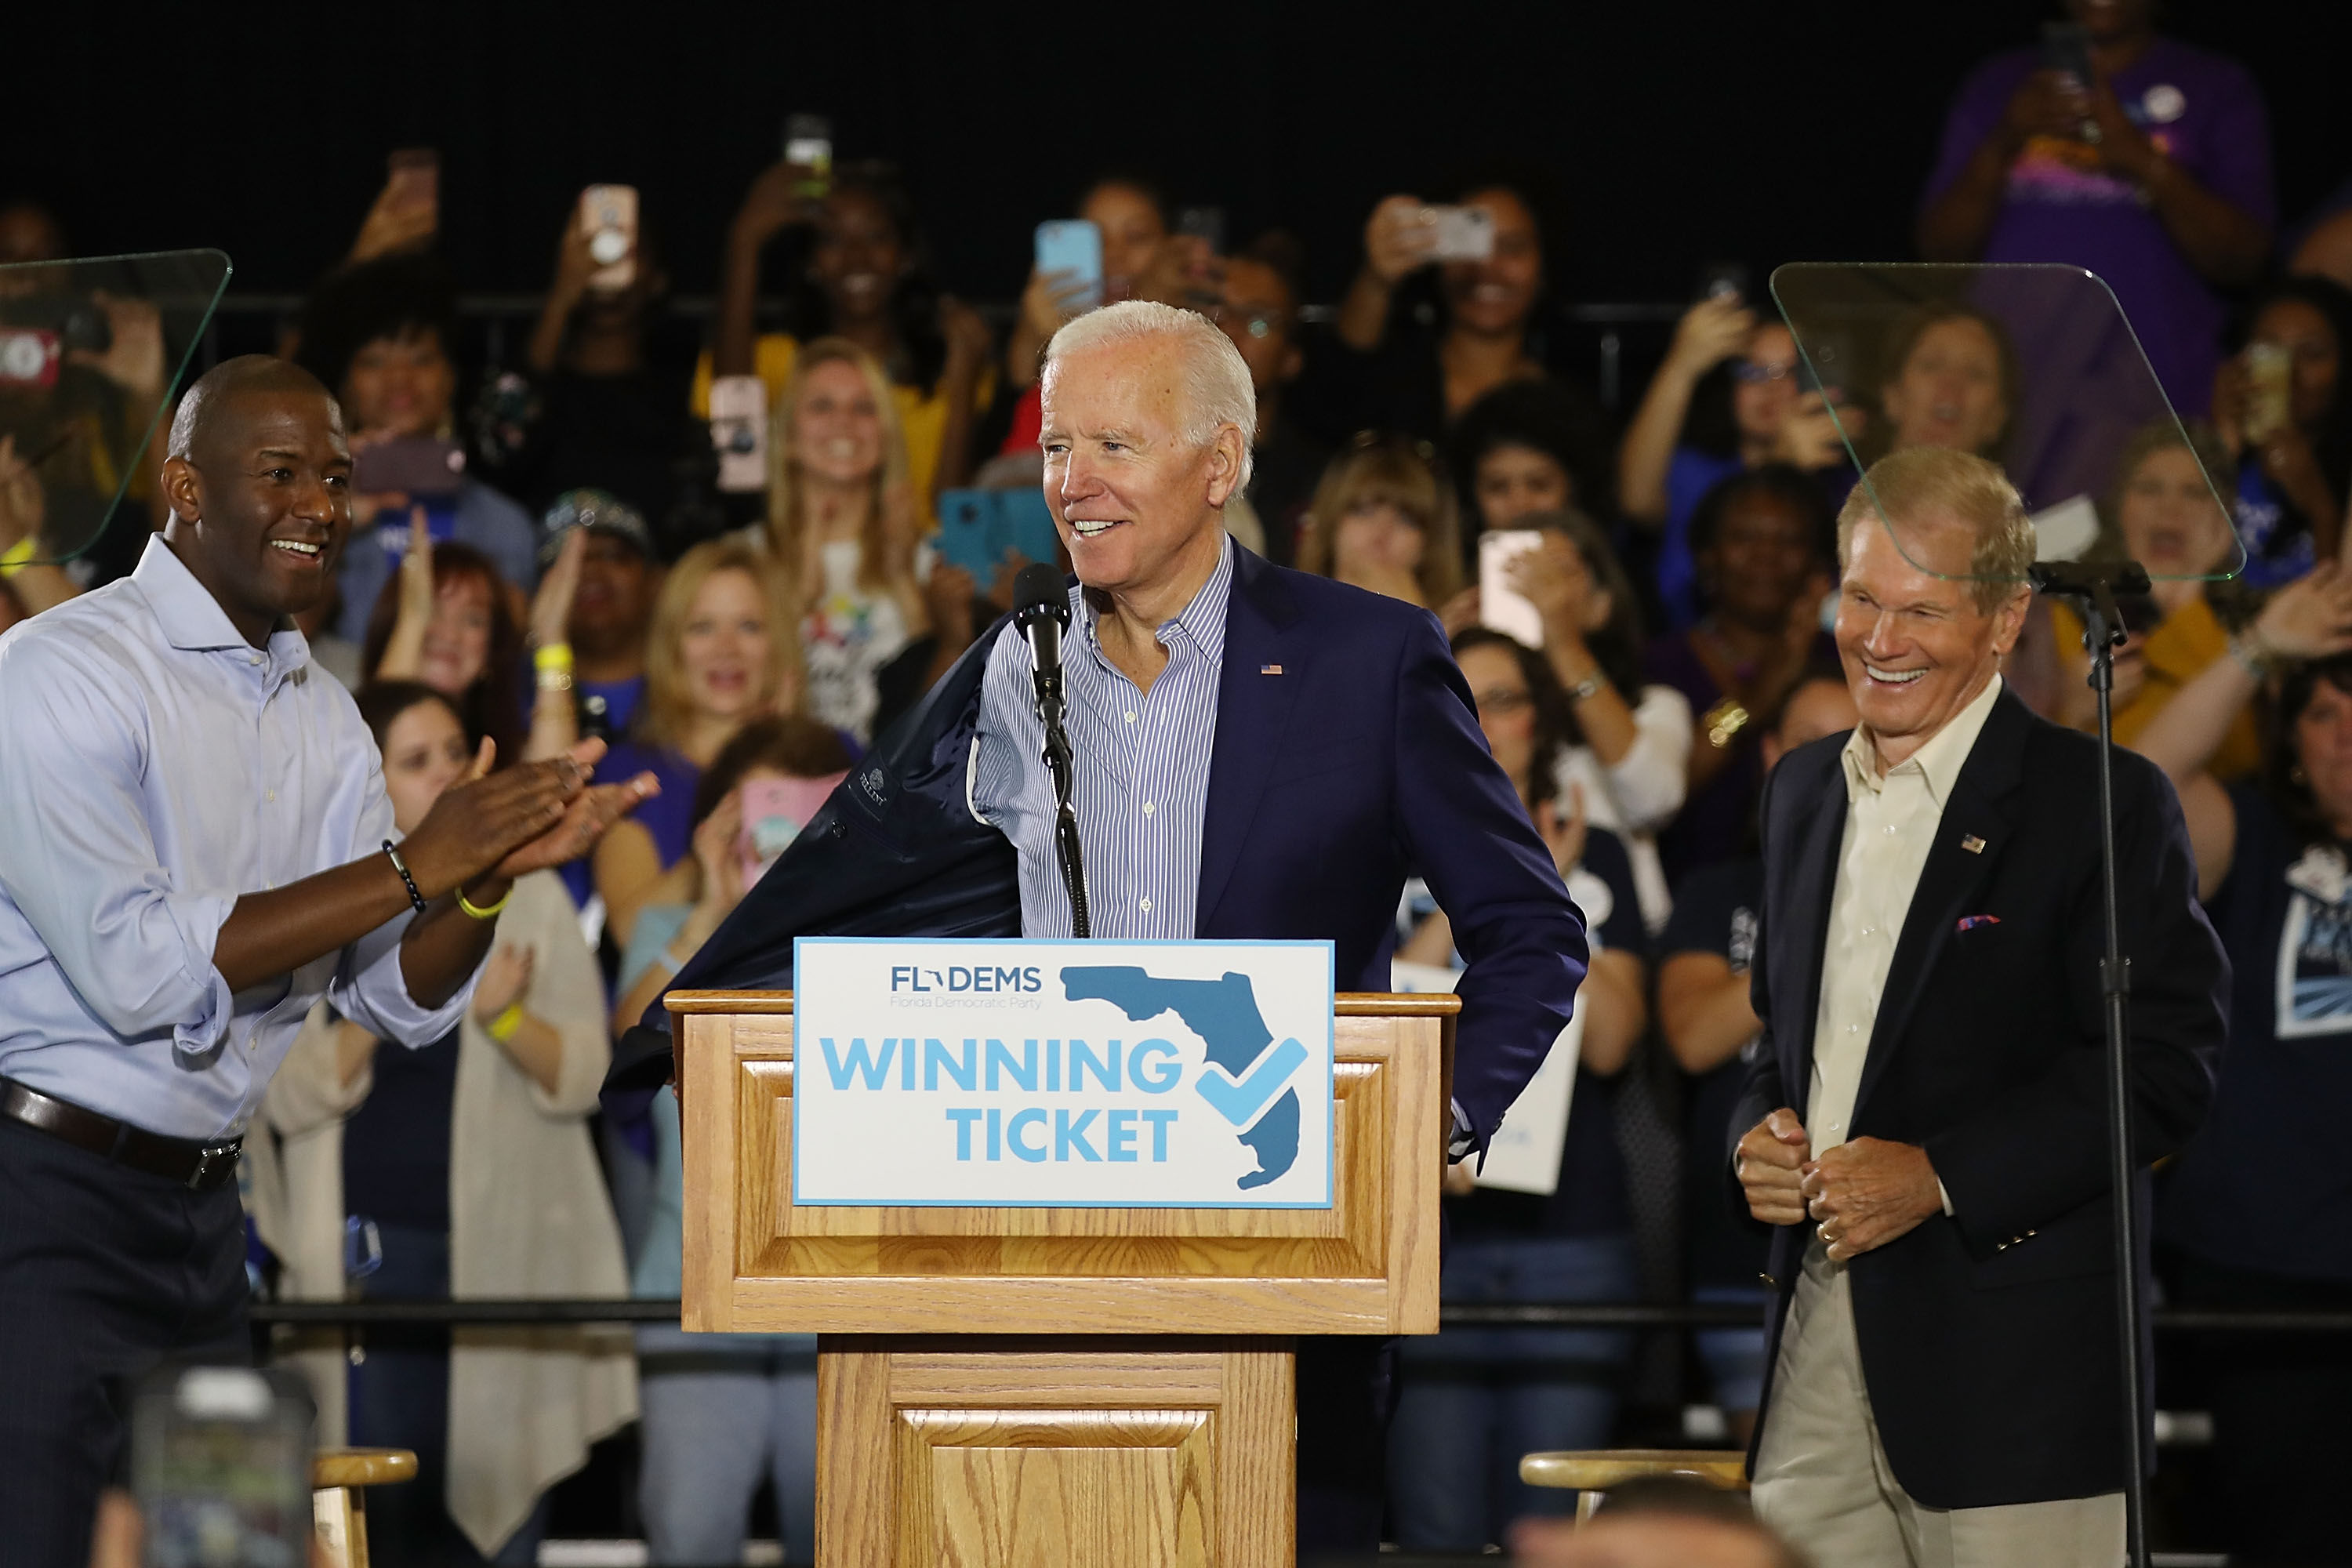 TAMPA, FL - OCTOBER 22: Former Vice President Joe Biden arrives on stage with Florida Democratic gubernatorial nominee Andrew Gillum and U.S. Sen. Bill Nelson (D-FL) during a campaign rally held at the University of South Florida Campus Recreation Building on October 22, 2018 in Tampa, Florida. The rally was held to support U.S. Sen. Bill Nelson (D-FL) and Democratic gubernatorial nominee Andrew Gillum as they run against their Republican opponents. (Photo by Joe Raedle/Getty Images)